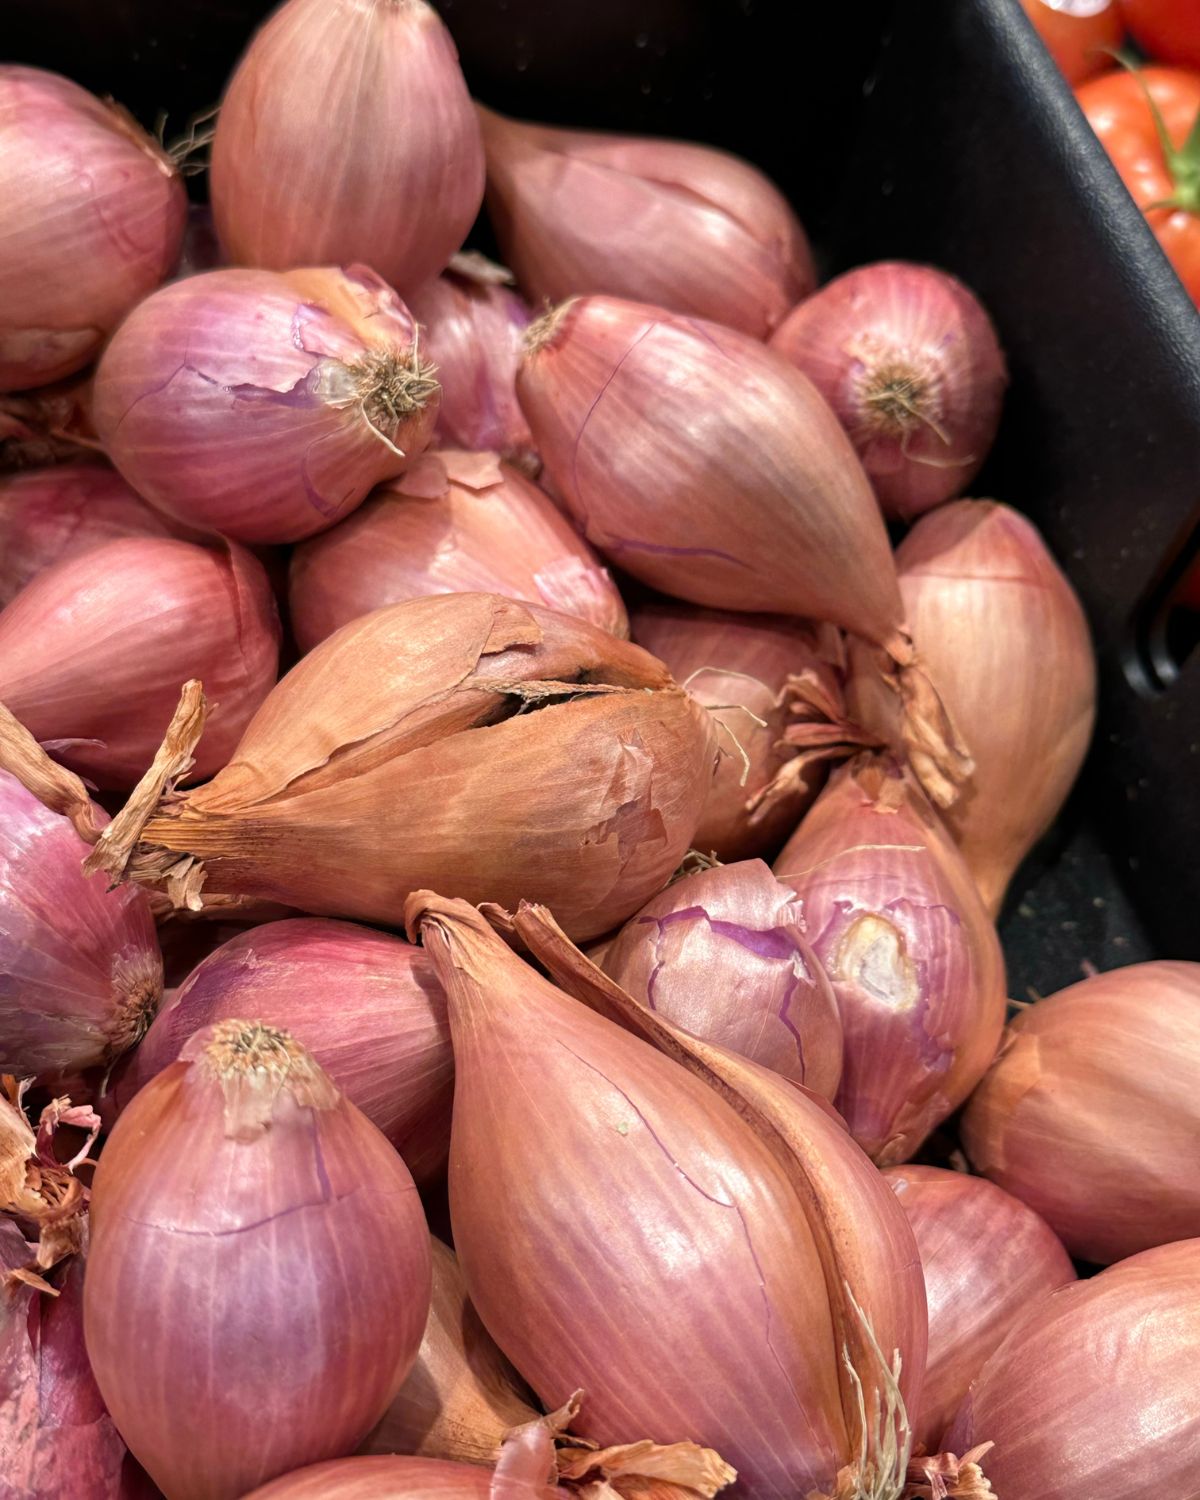 Lots of shallots in a container.